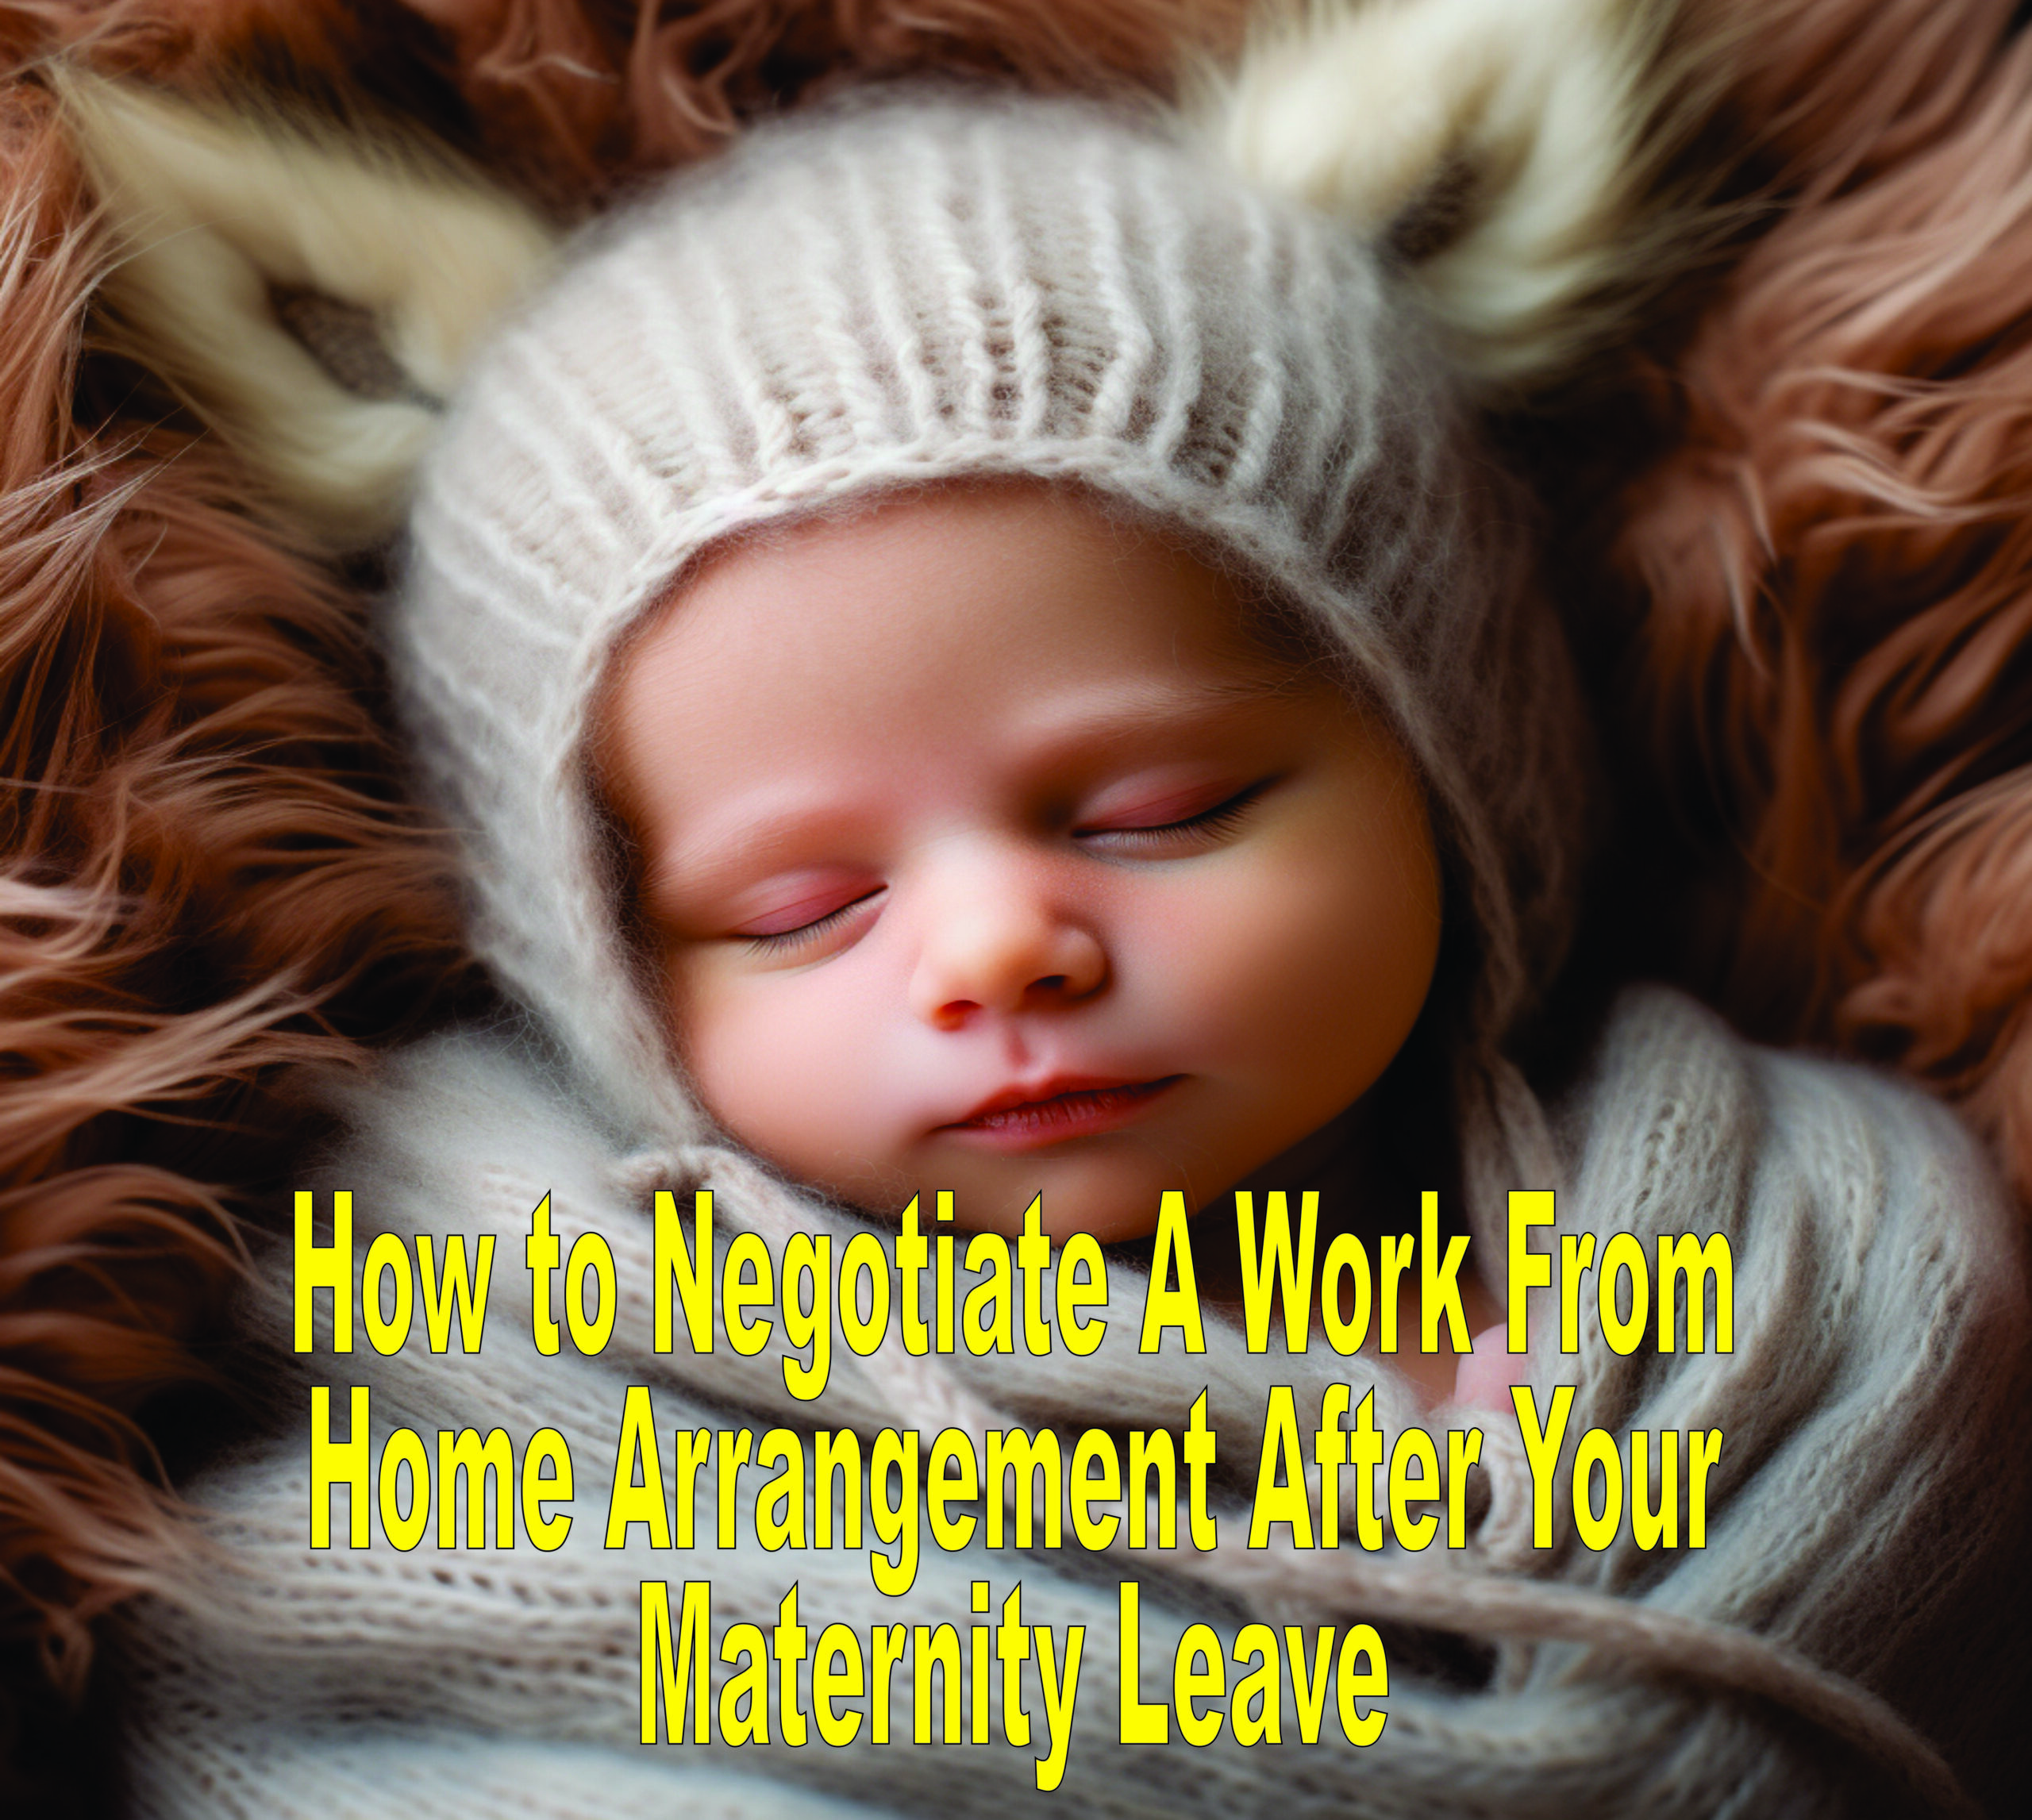 How To Negotiate A Work From Home Arrangement After Your Maternity Leave